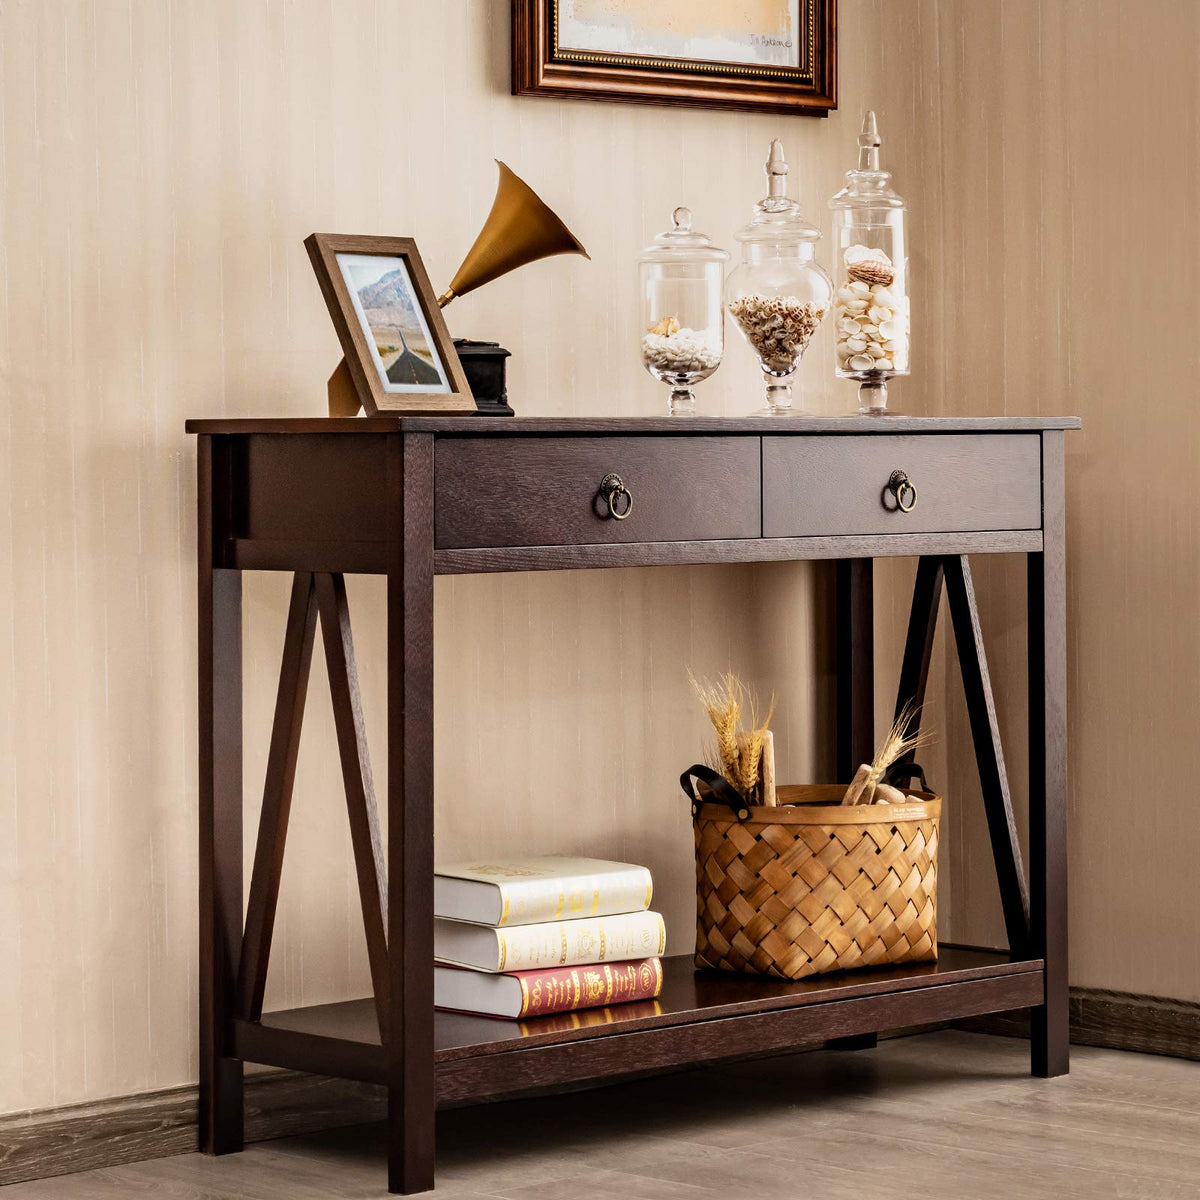 Giantex Console Table with Drawers 3-Tier Couch Table with Storage Shelves